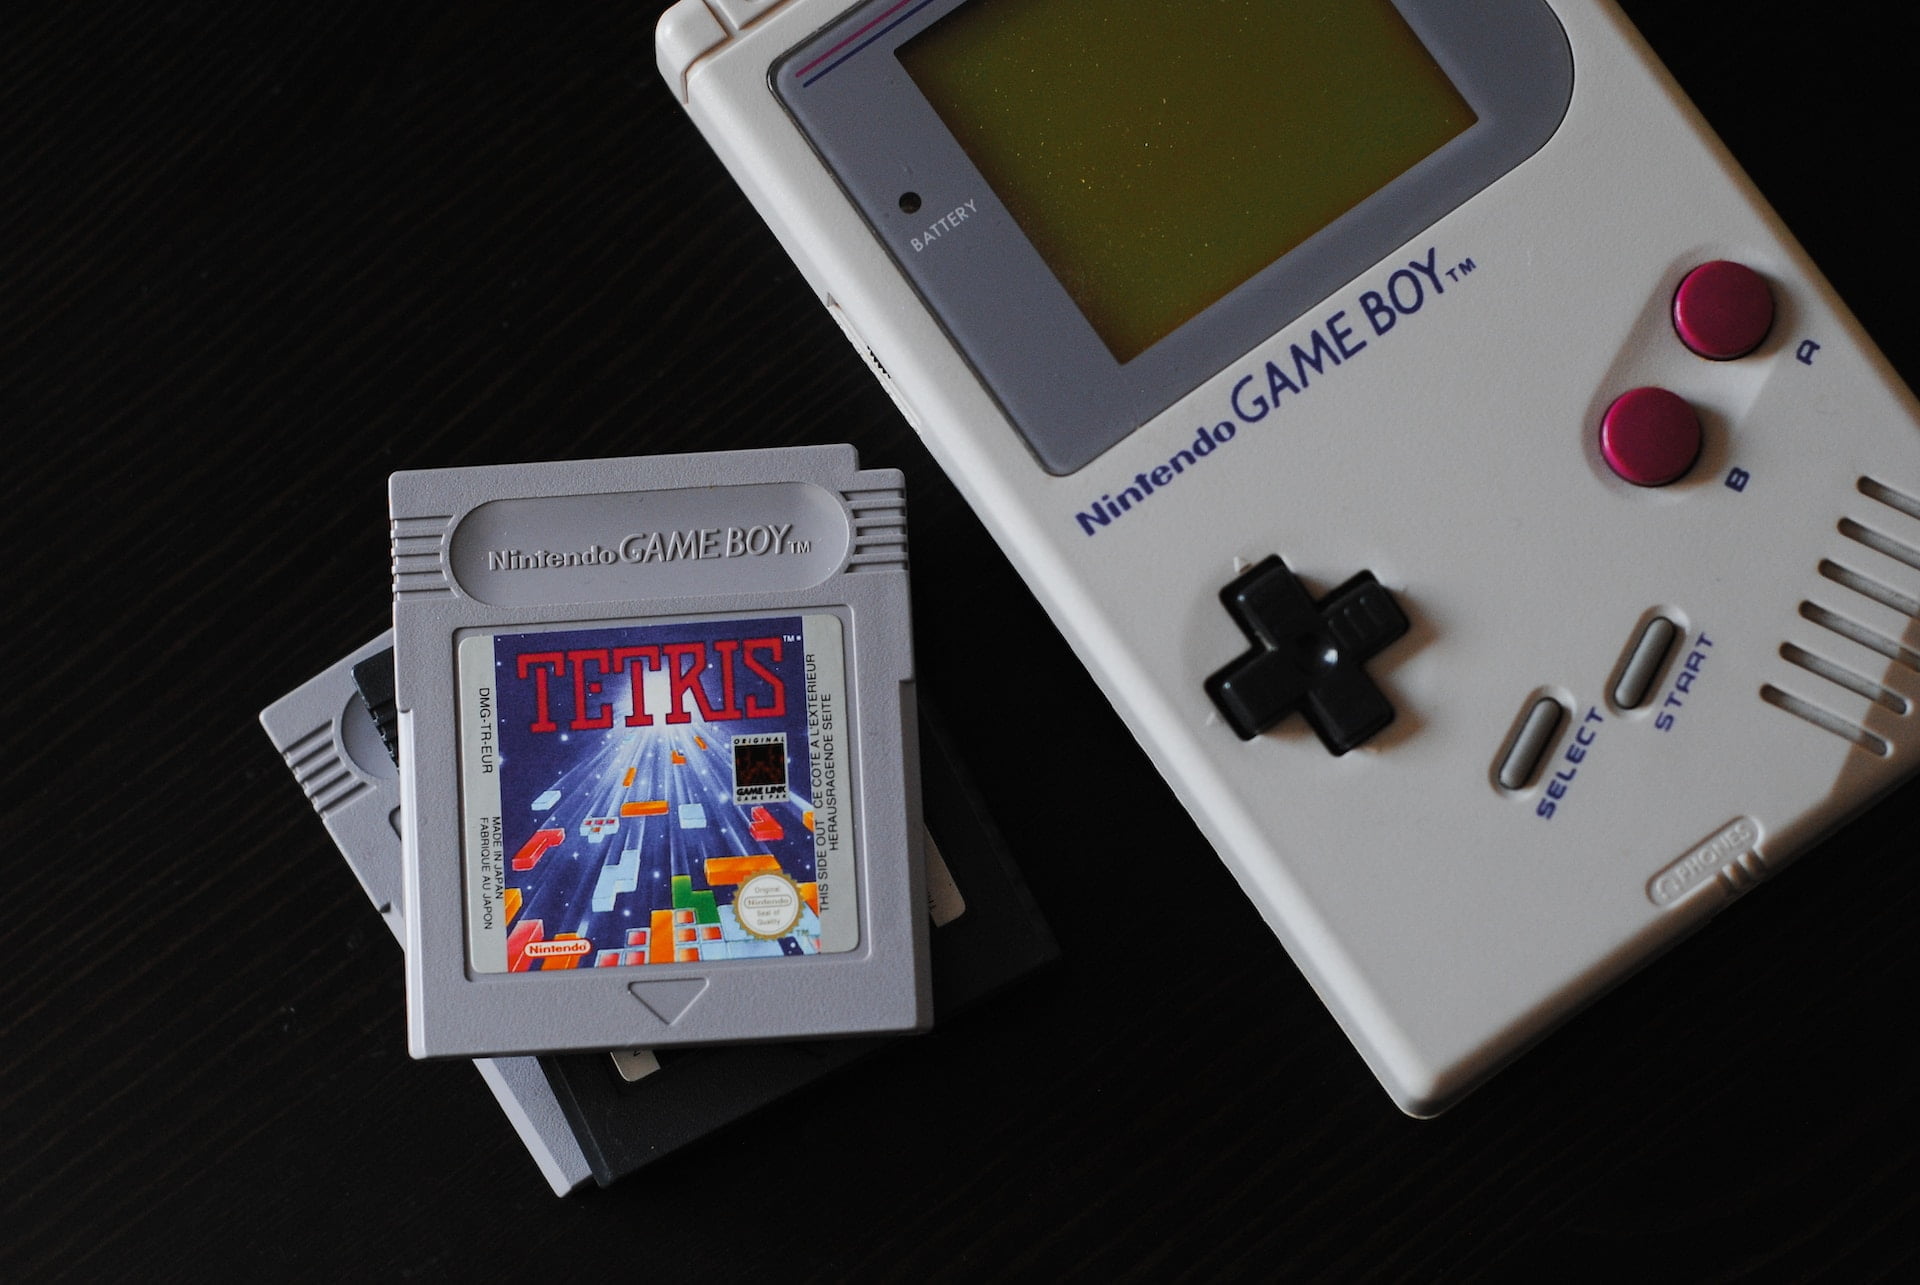 The Best Nintendo Gameboy Mods for Improved DMG Picture and Sound